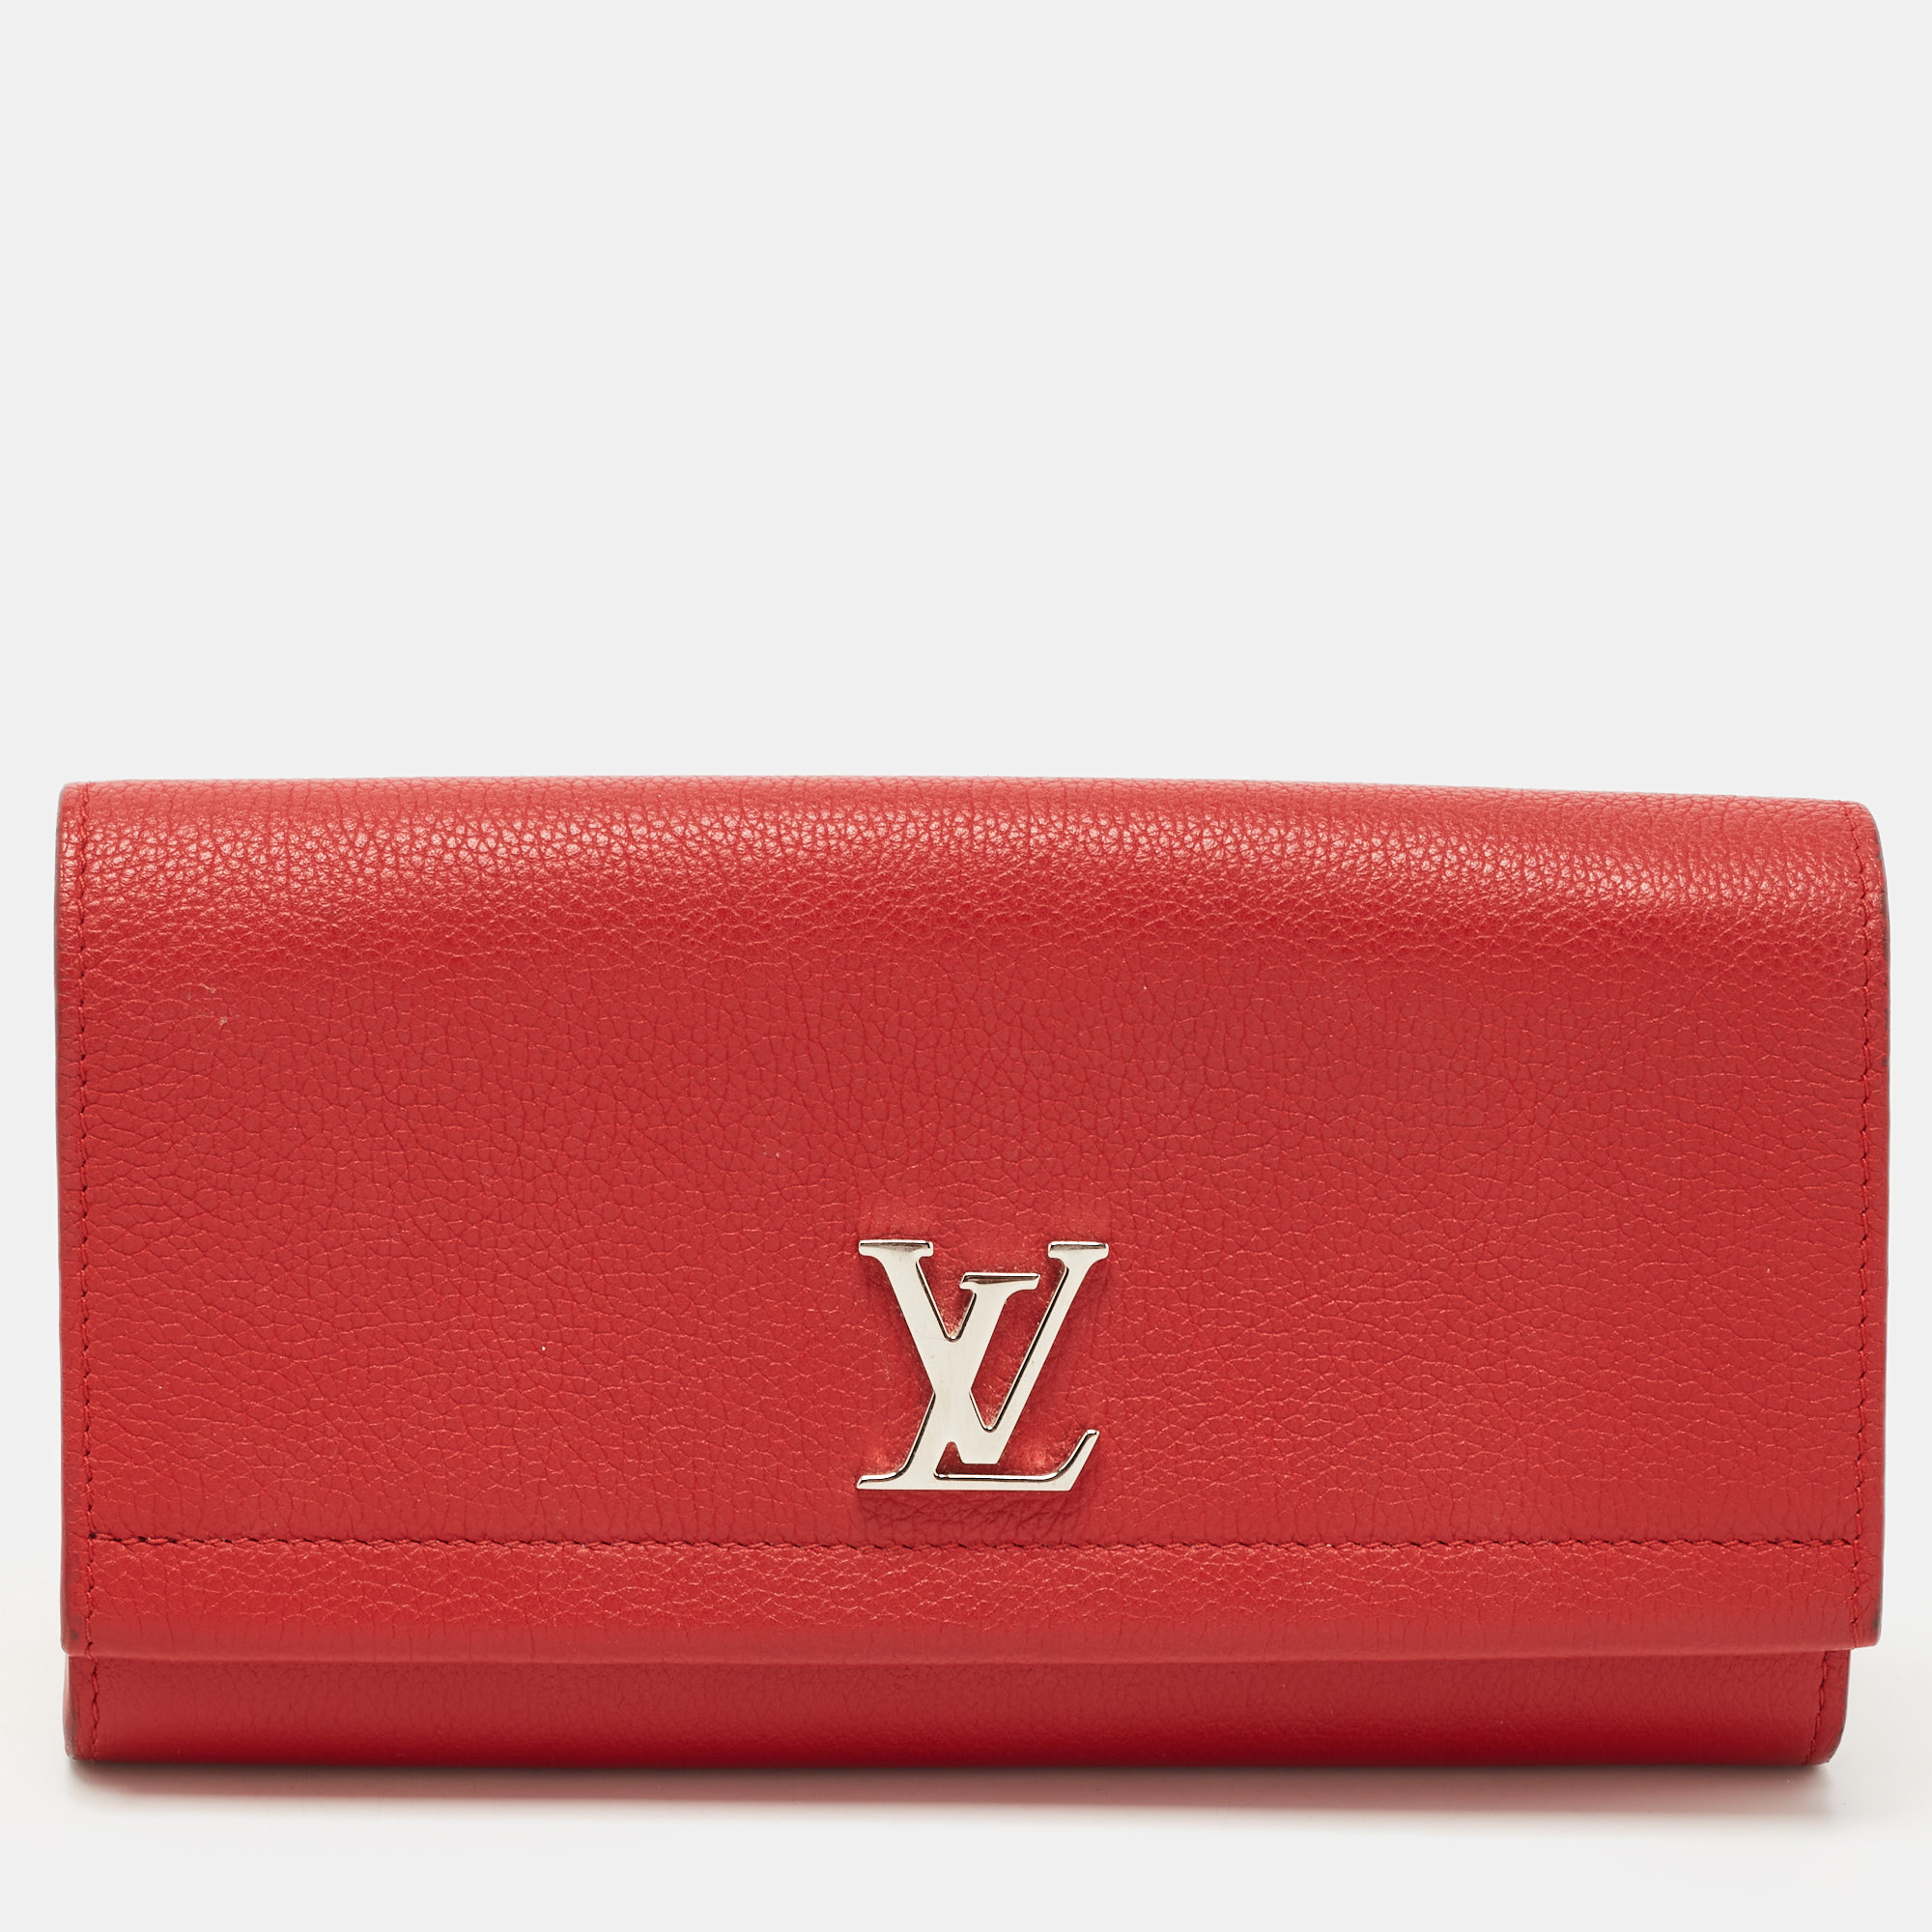 This luxurious Lock Me ll wallet by Louis Vuitton will be a joy to carry around. Made from red leather the flap features the signature LV logo in silver tone metal. It opens to reveal a compartmentalized interior.